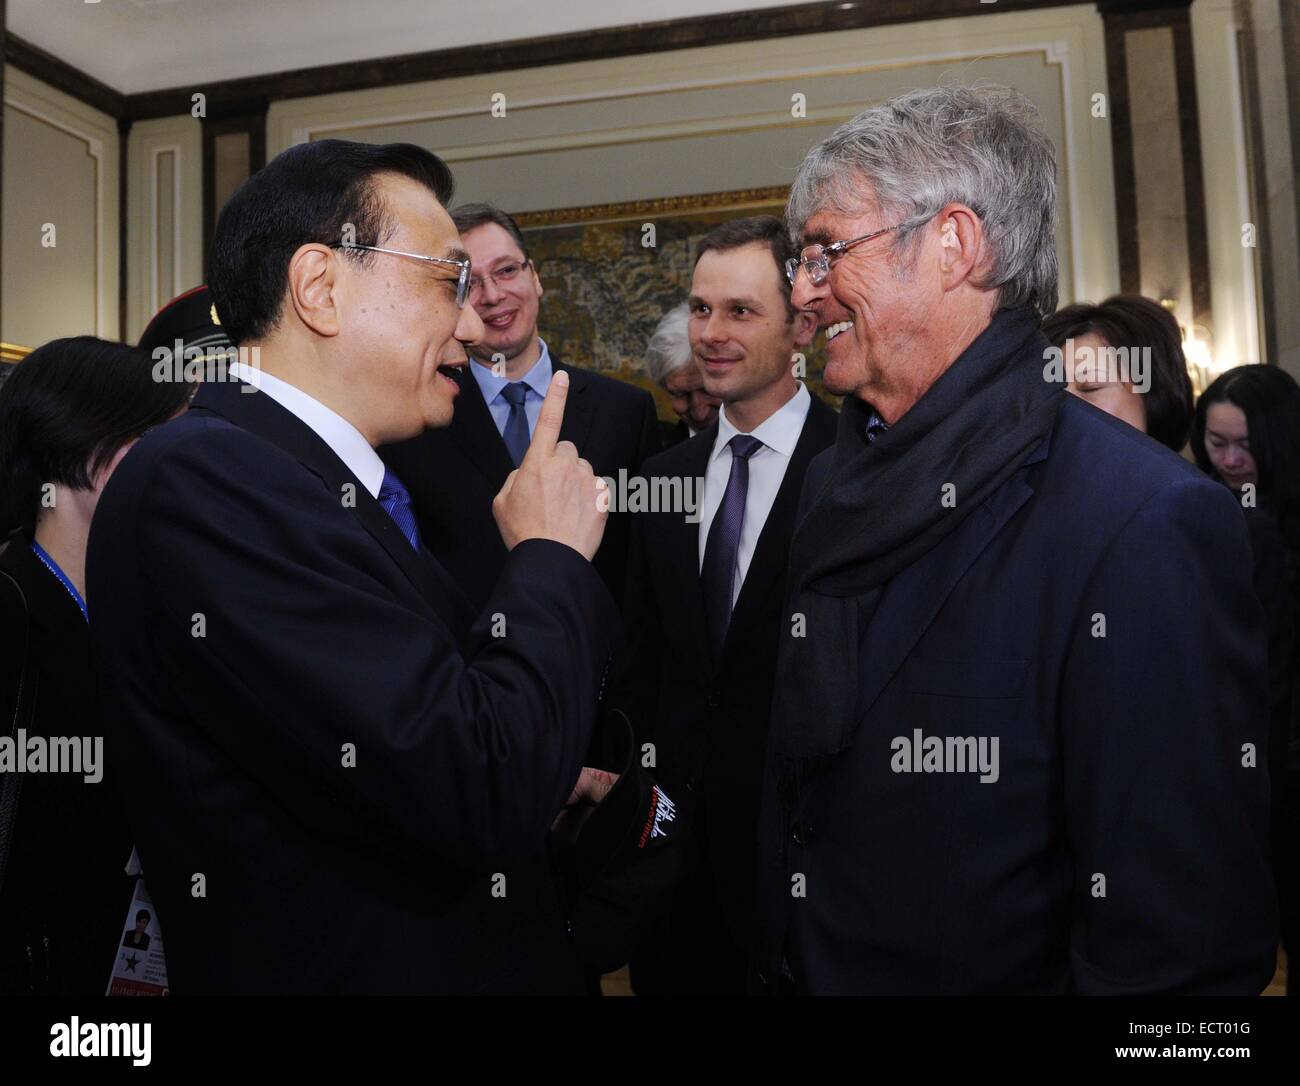 Belgrade, Serbia. 18th Dec, 2014. Chinese Premier Li Keqiang (L, front) talks with famous soccer coach Bora Milutinovic in Belgrade, Serbia, Dec. 18, 2014. Li was presented the charter of honorary citizen of Belgrade on Thursday afternoon and exchanged views with some distinguished Serbian personages on expanding bilateral cooperation in such areas as culture and sports. © Rao Aimin/Xinhua/Alamy Live News Stock Photo